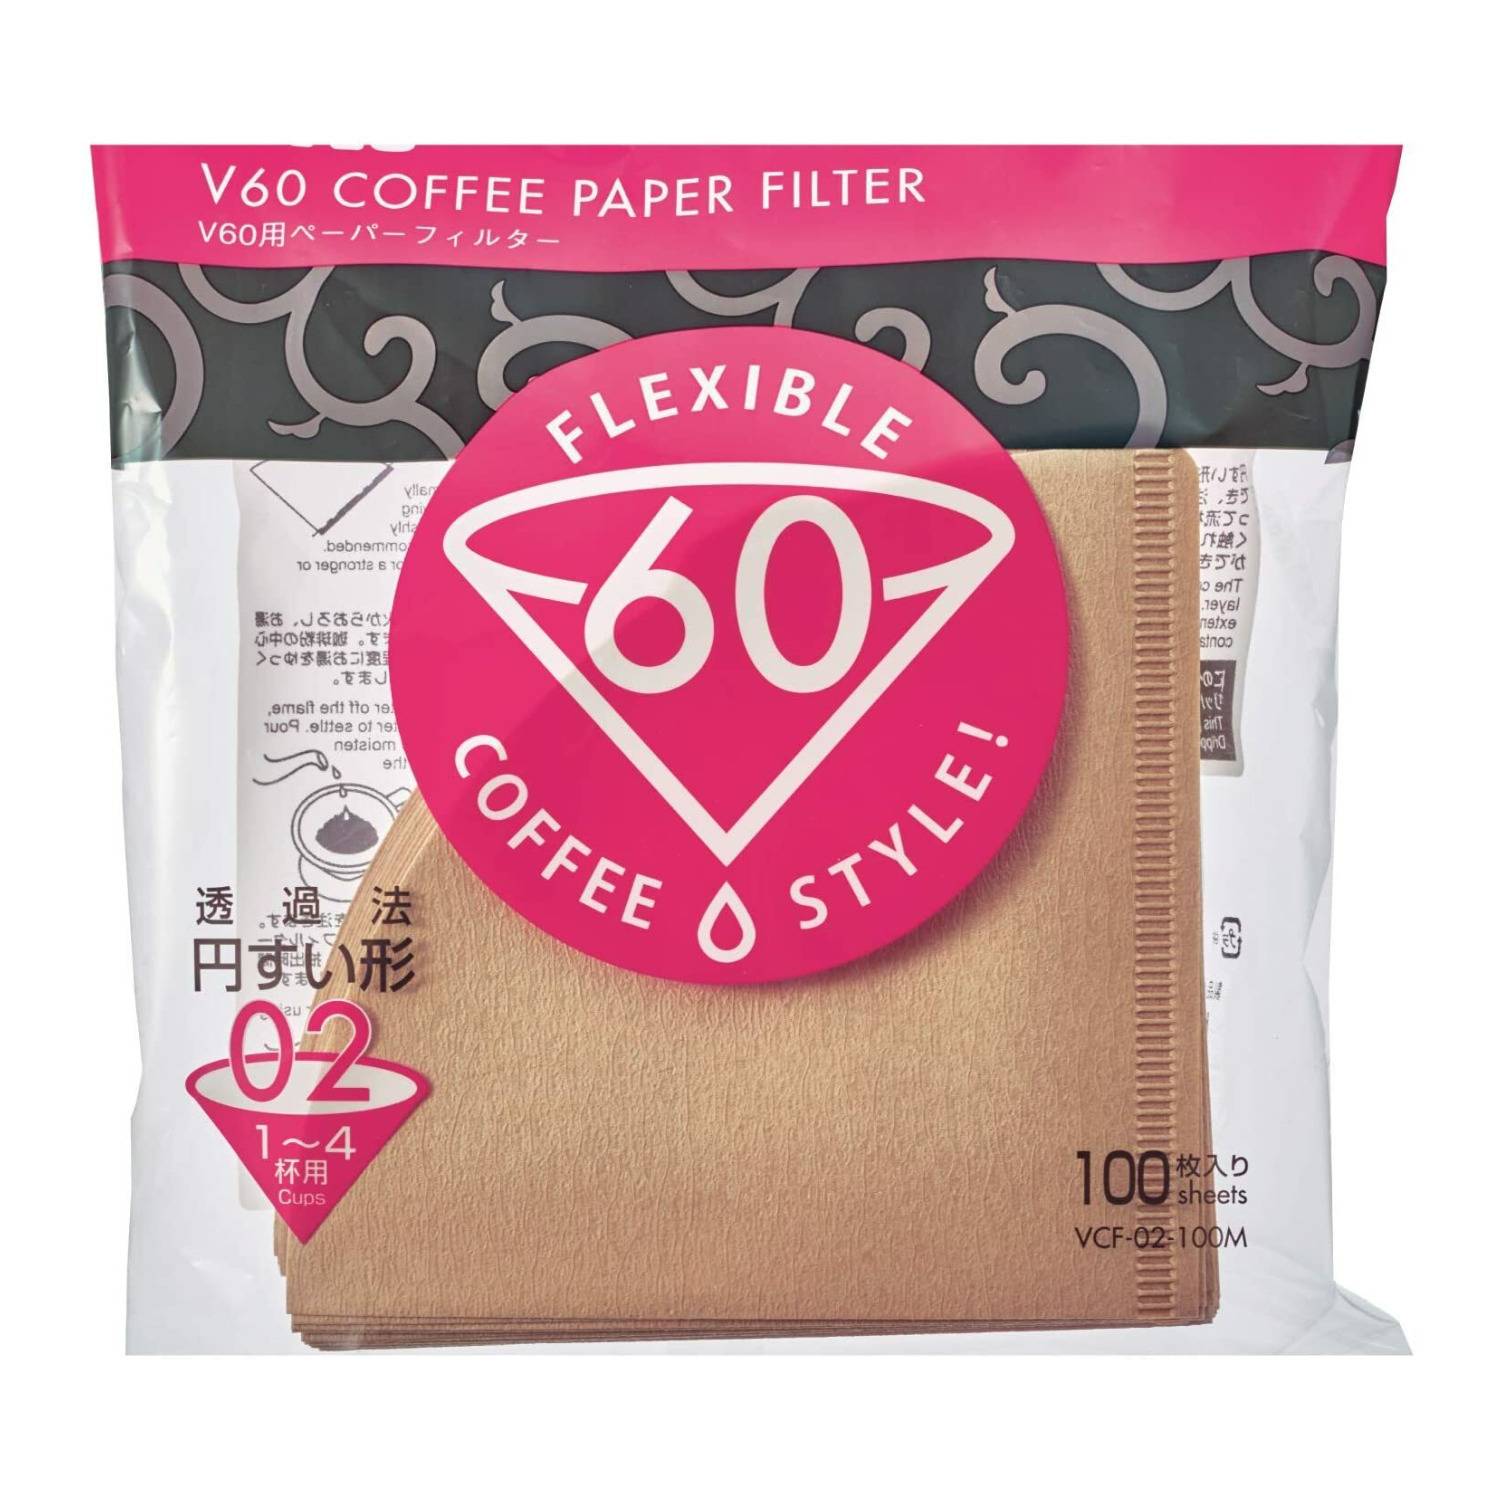 Hario V60 Misarashi Coffee Paper Filters (Size 02, Natural, 100-Pack)